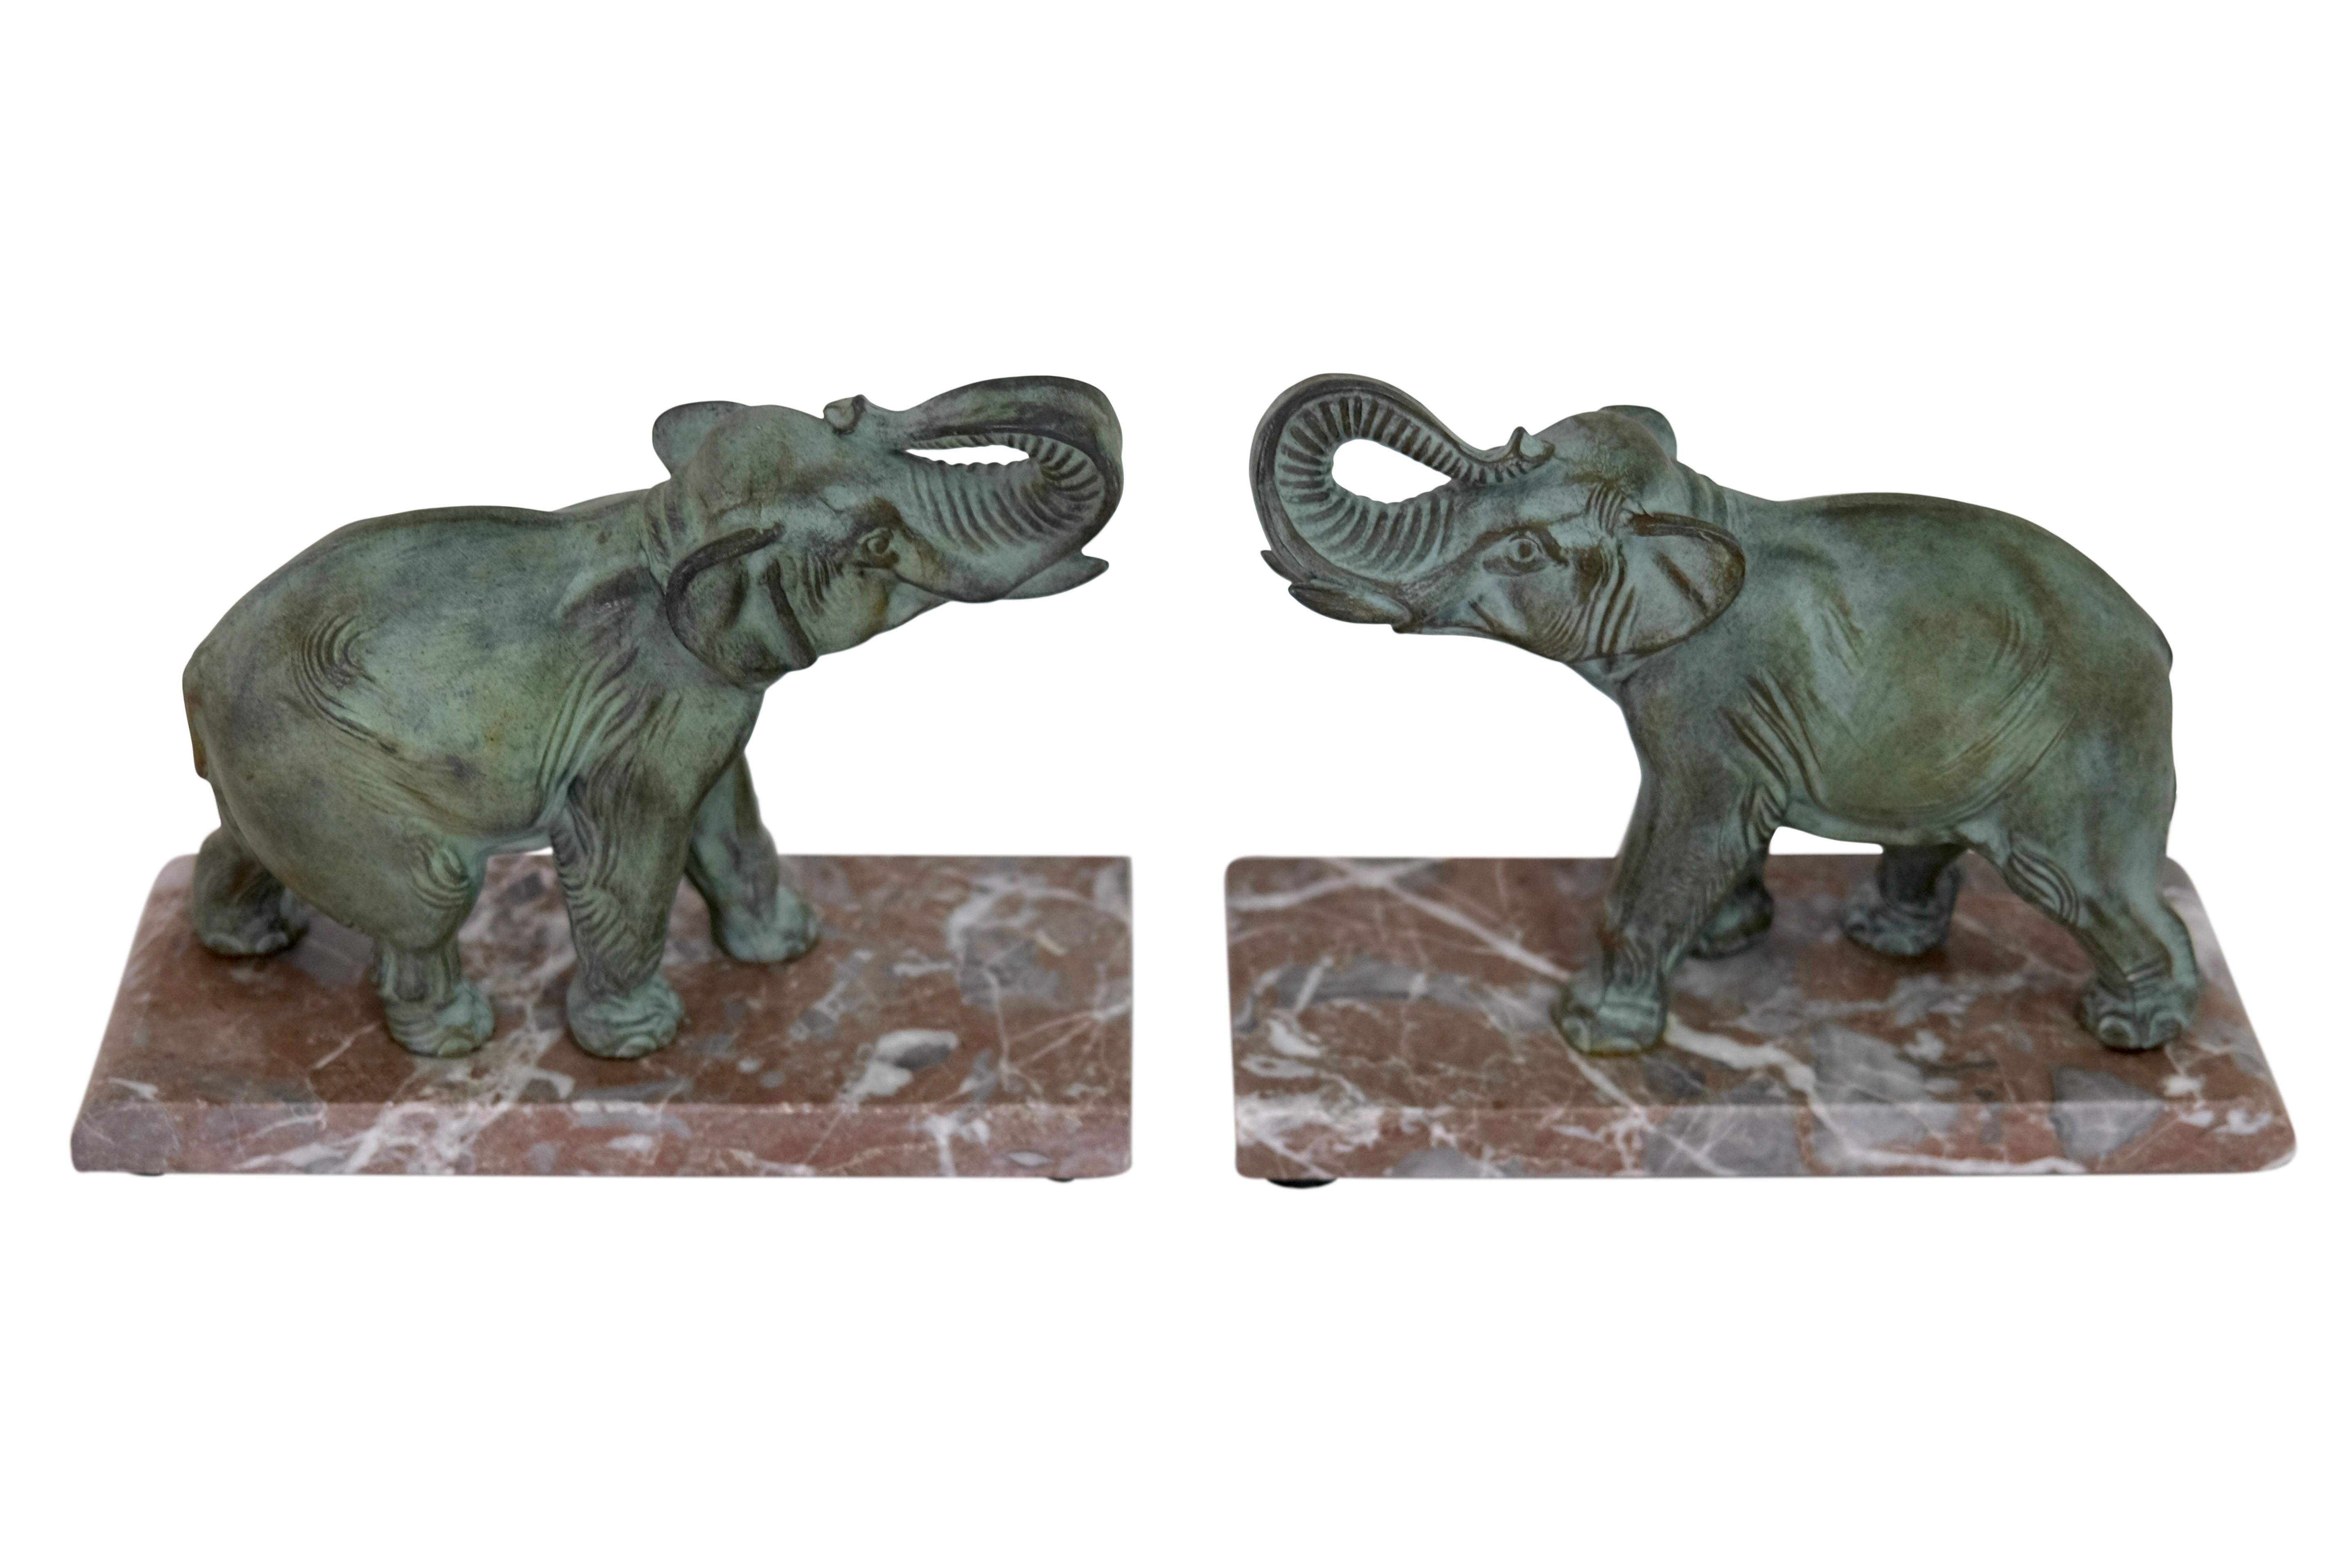 Elephant bookends with raised trunk

Pair of bookends
Elephants with raised trunk
Spelter with original patina
Marble base

Original Art Deco, France 1930s

Dimensions (per object):
Width: 22.5 cm
Height: 18 cm
Depth: 9 cm